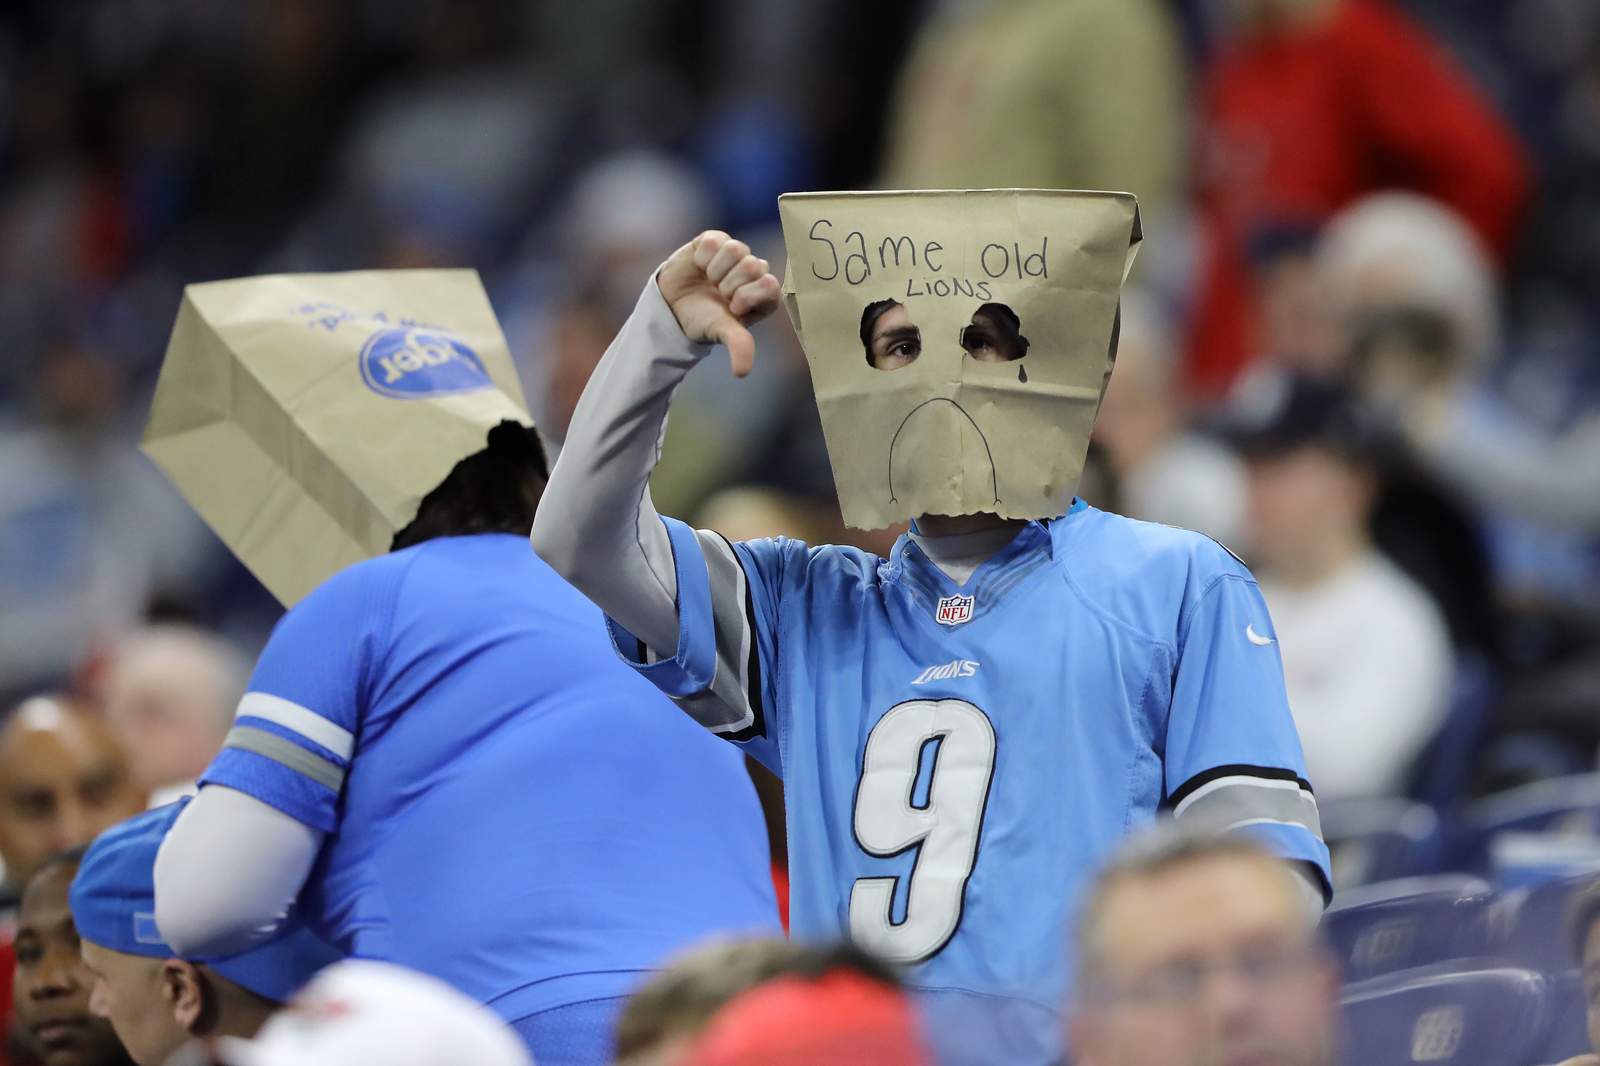 With no real fans at games, Detroit Lions offer fan cutouts to fill seats